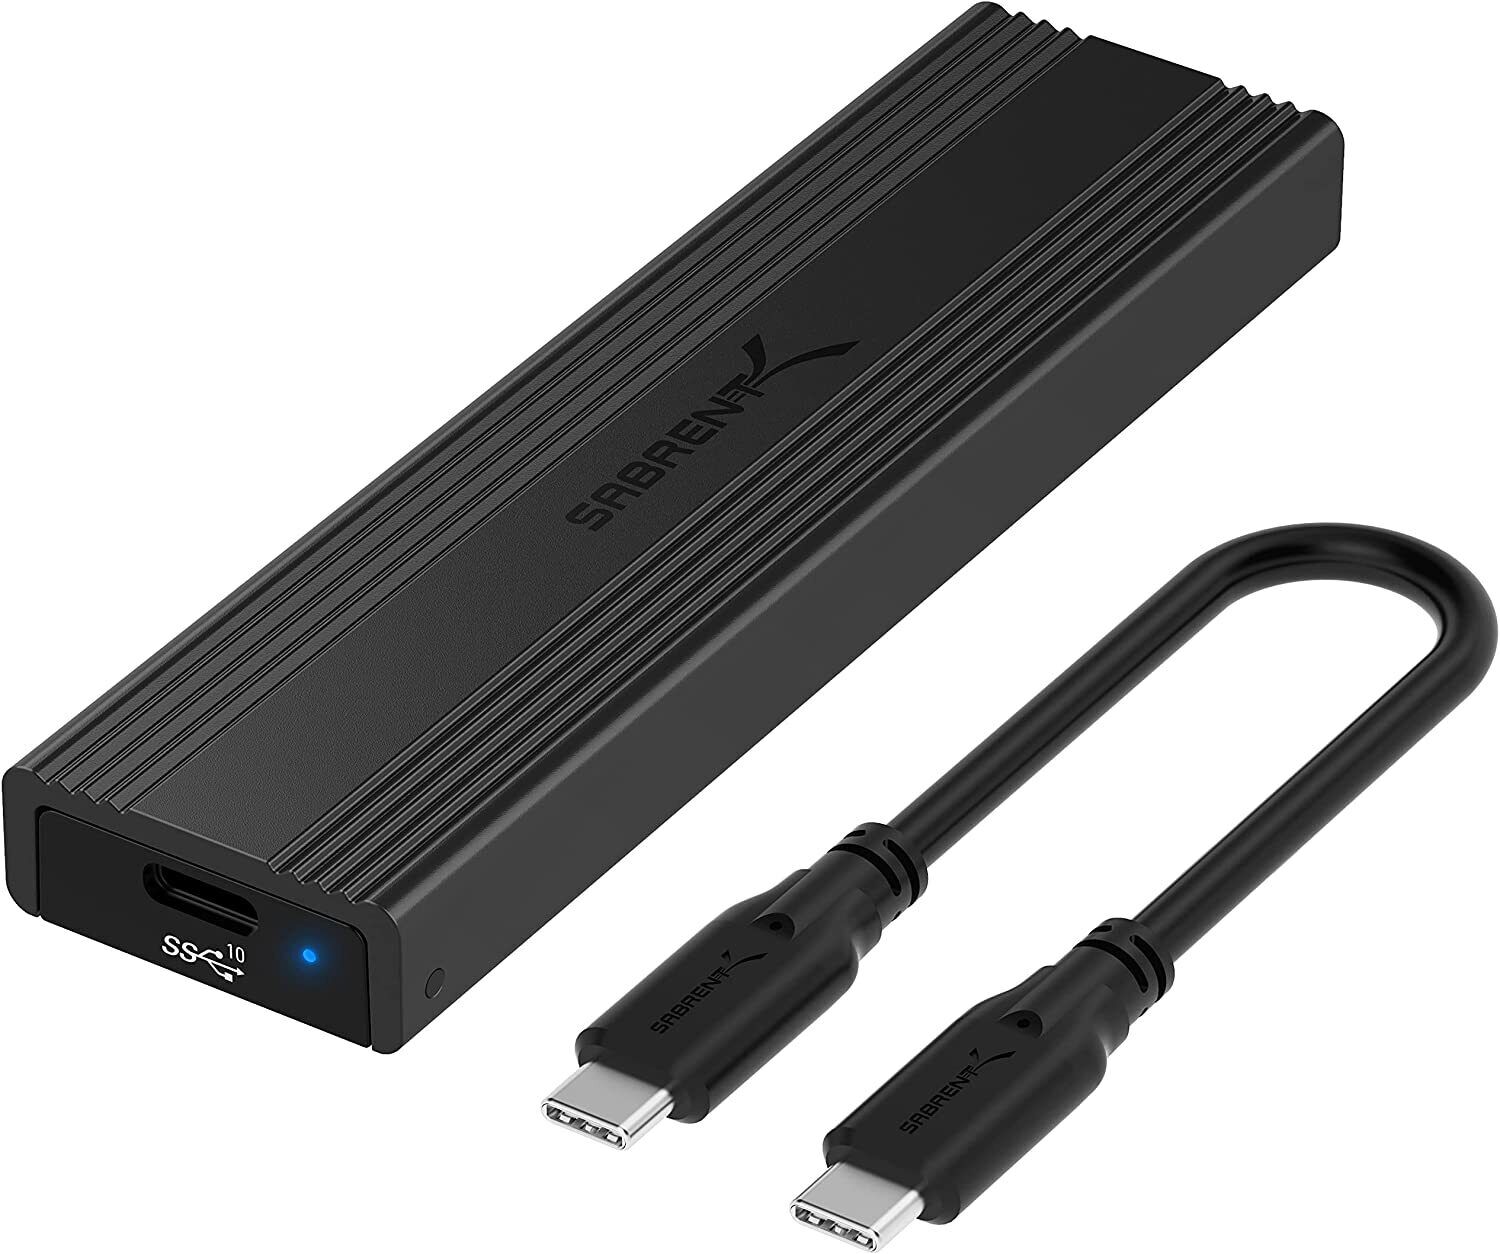 SABRENT USB 3.2 Type-C Tool-Free Enclosure for M.2 PCIe NVMe and SATA SSDs (EC-S